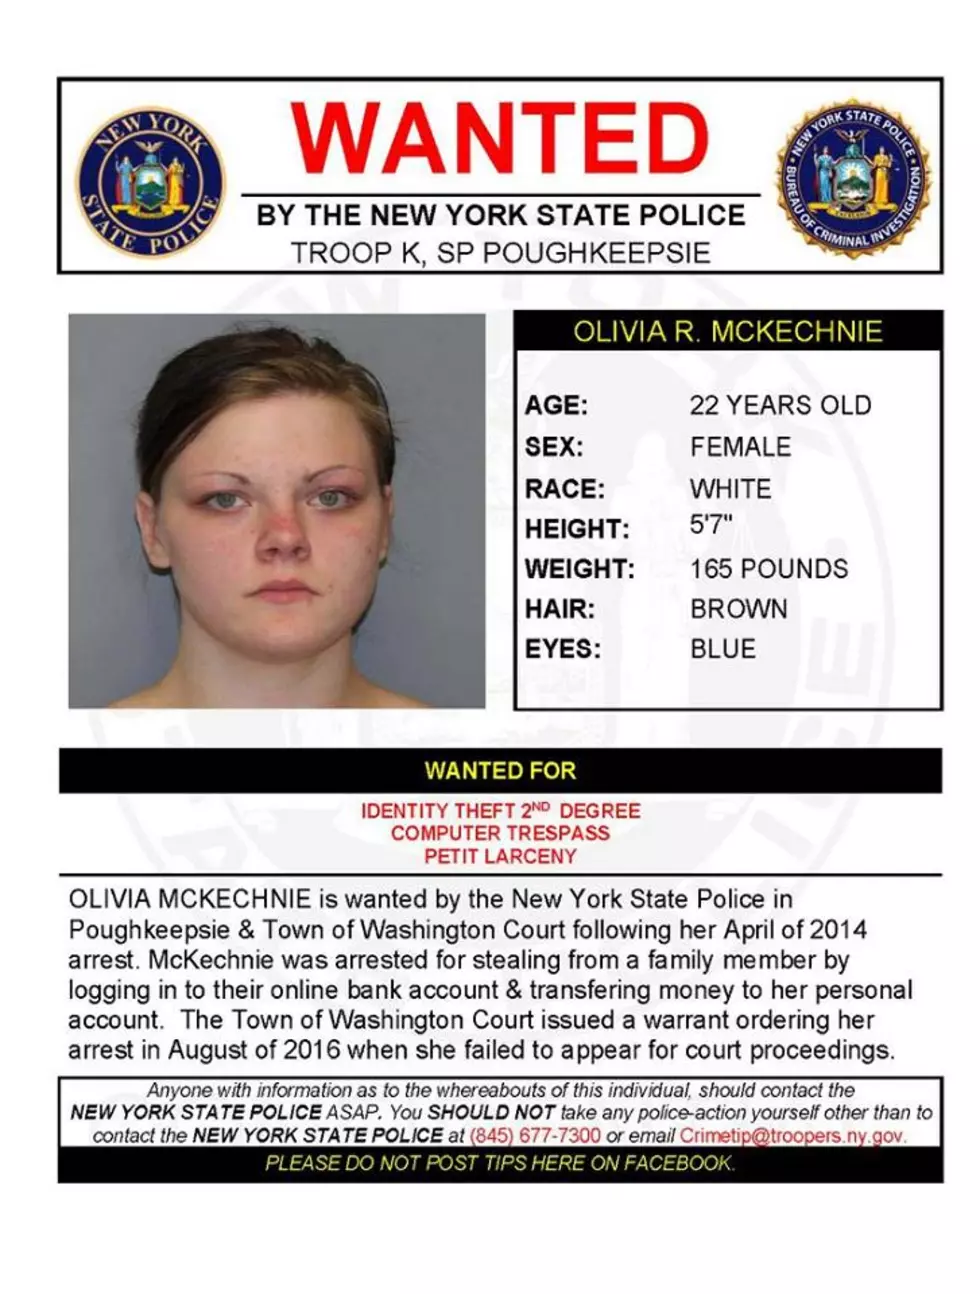 Warrant Wednesday: Dutchess County Woman Wanted For ID Theft